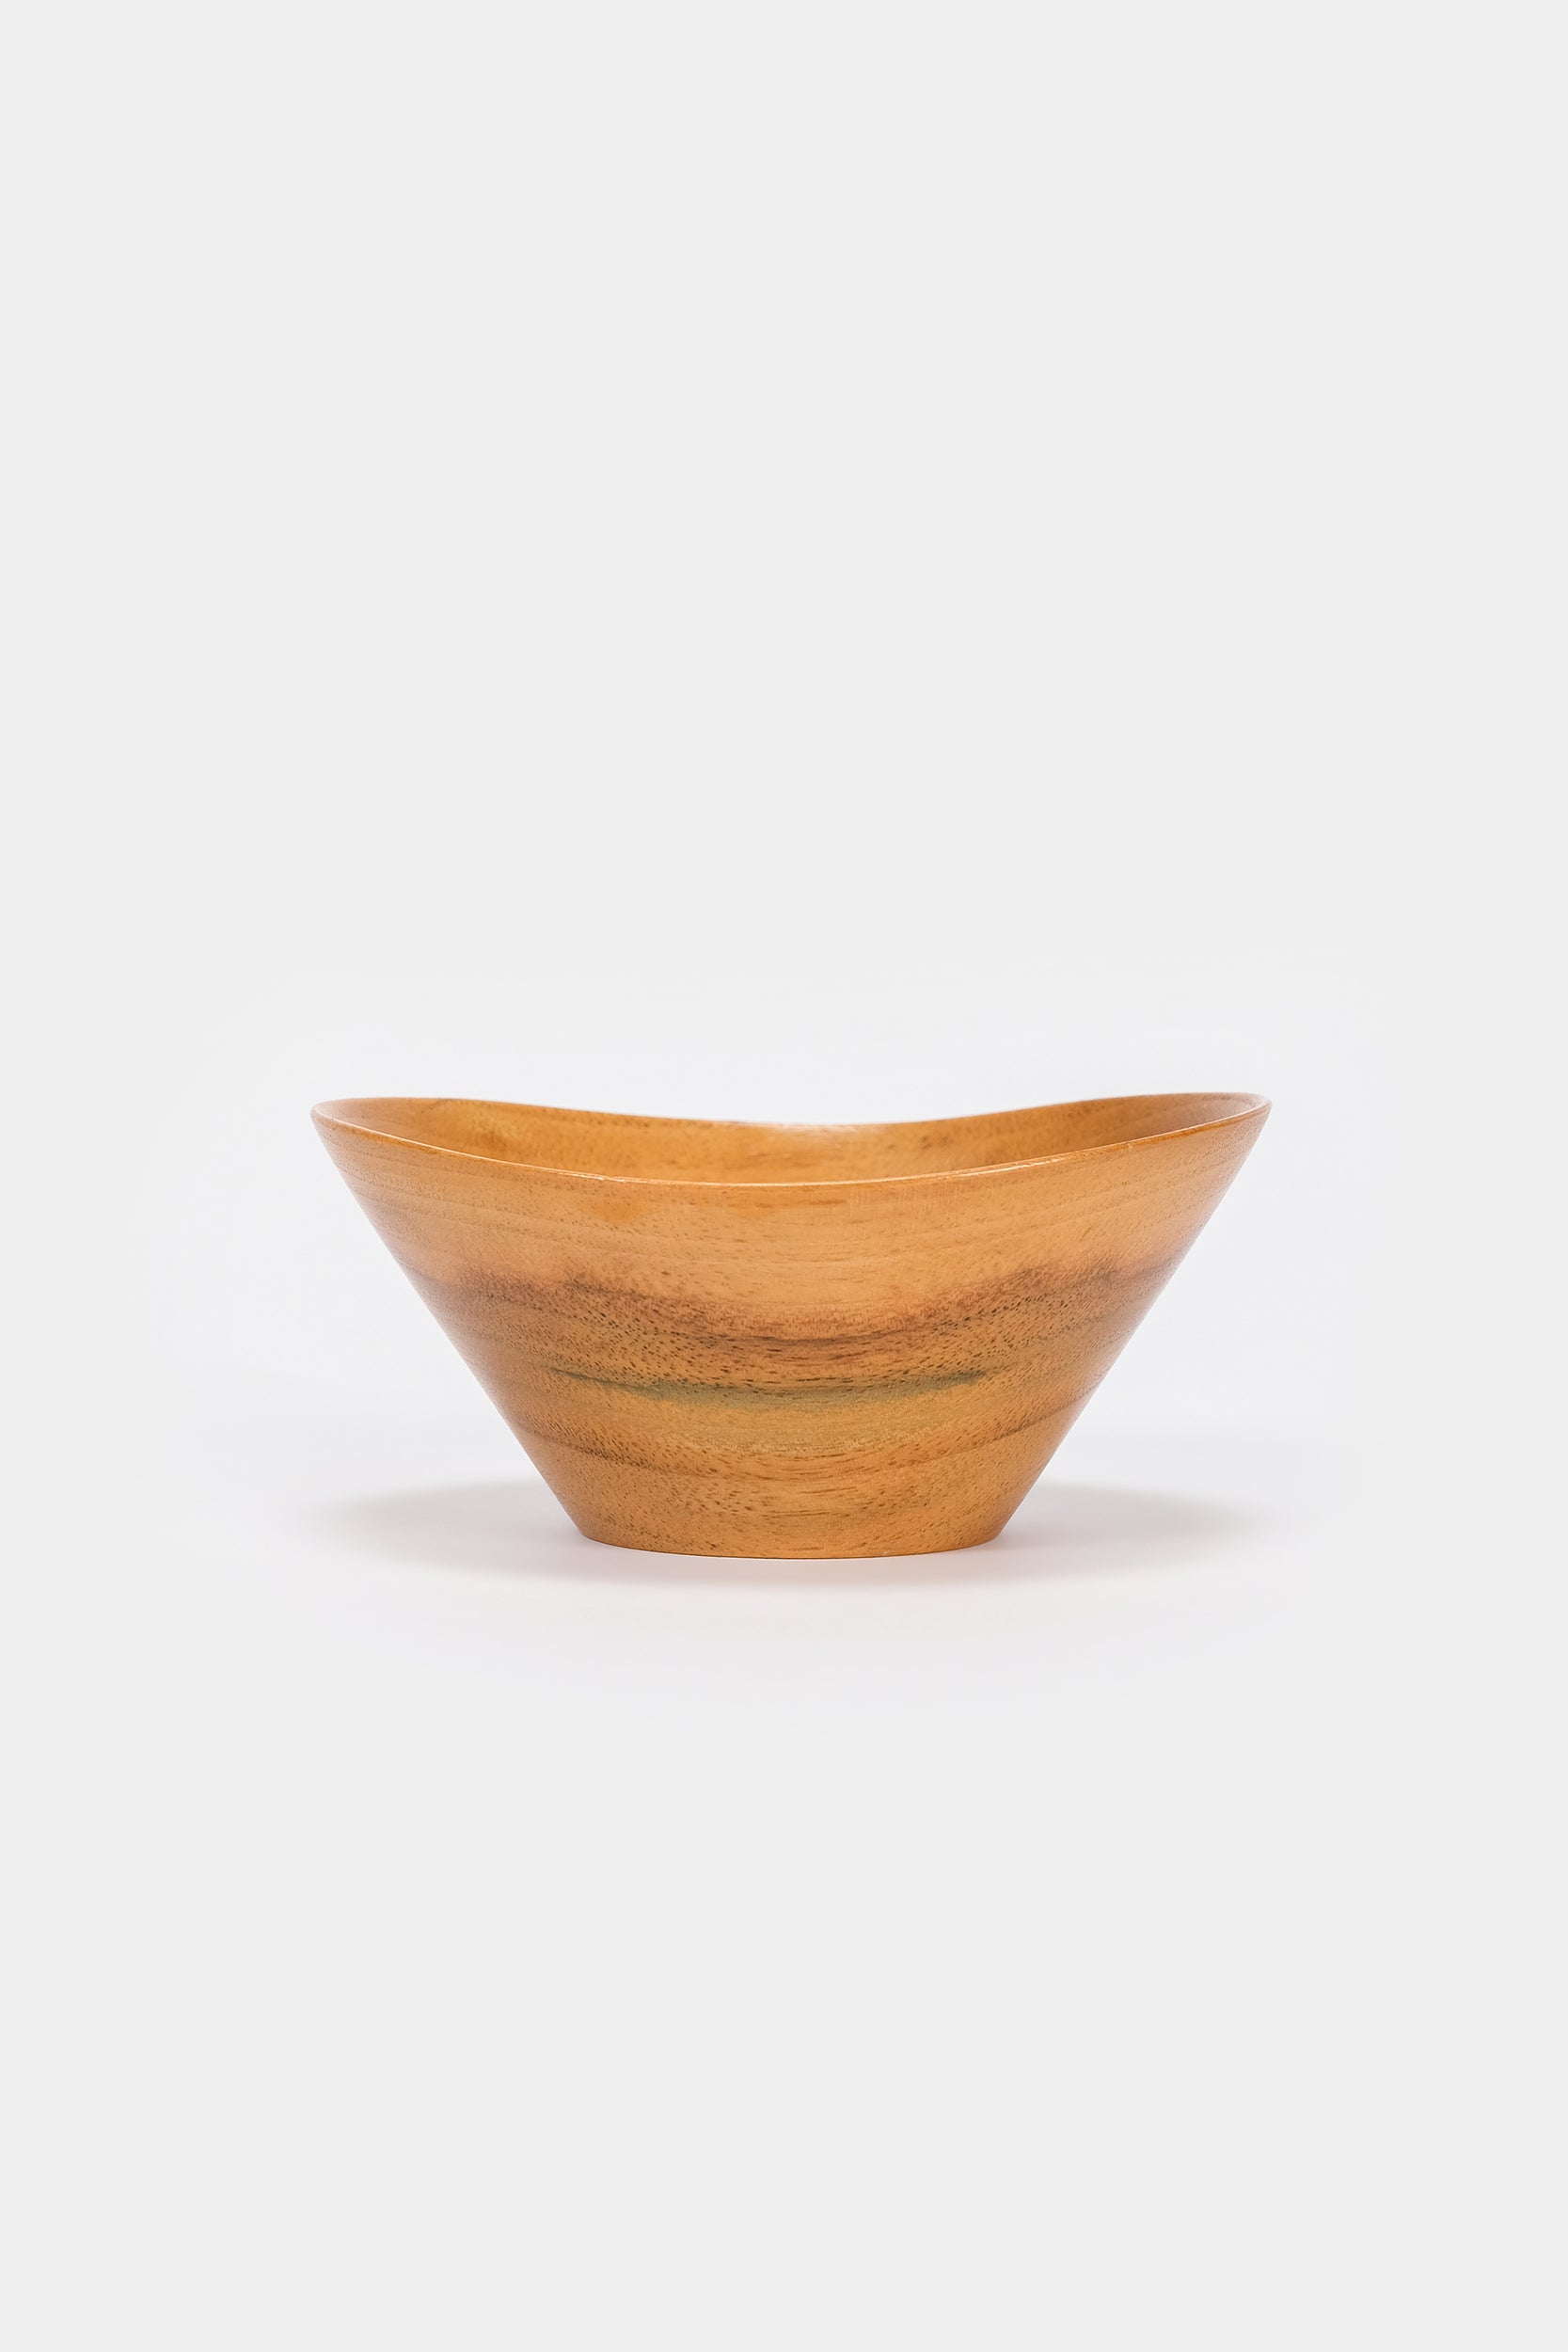 Small Wooden Bowl, Hand-turned, Switzerland, 50s